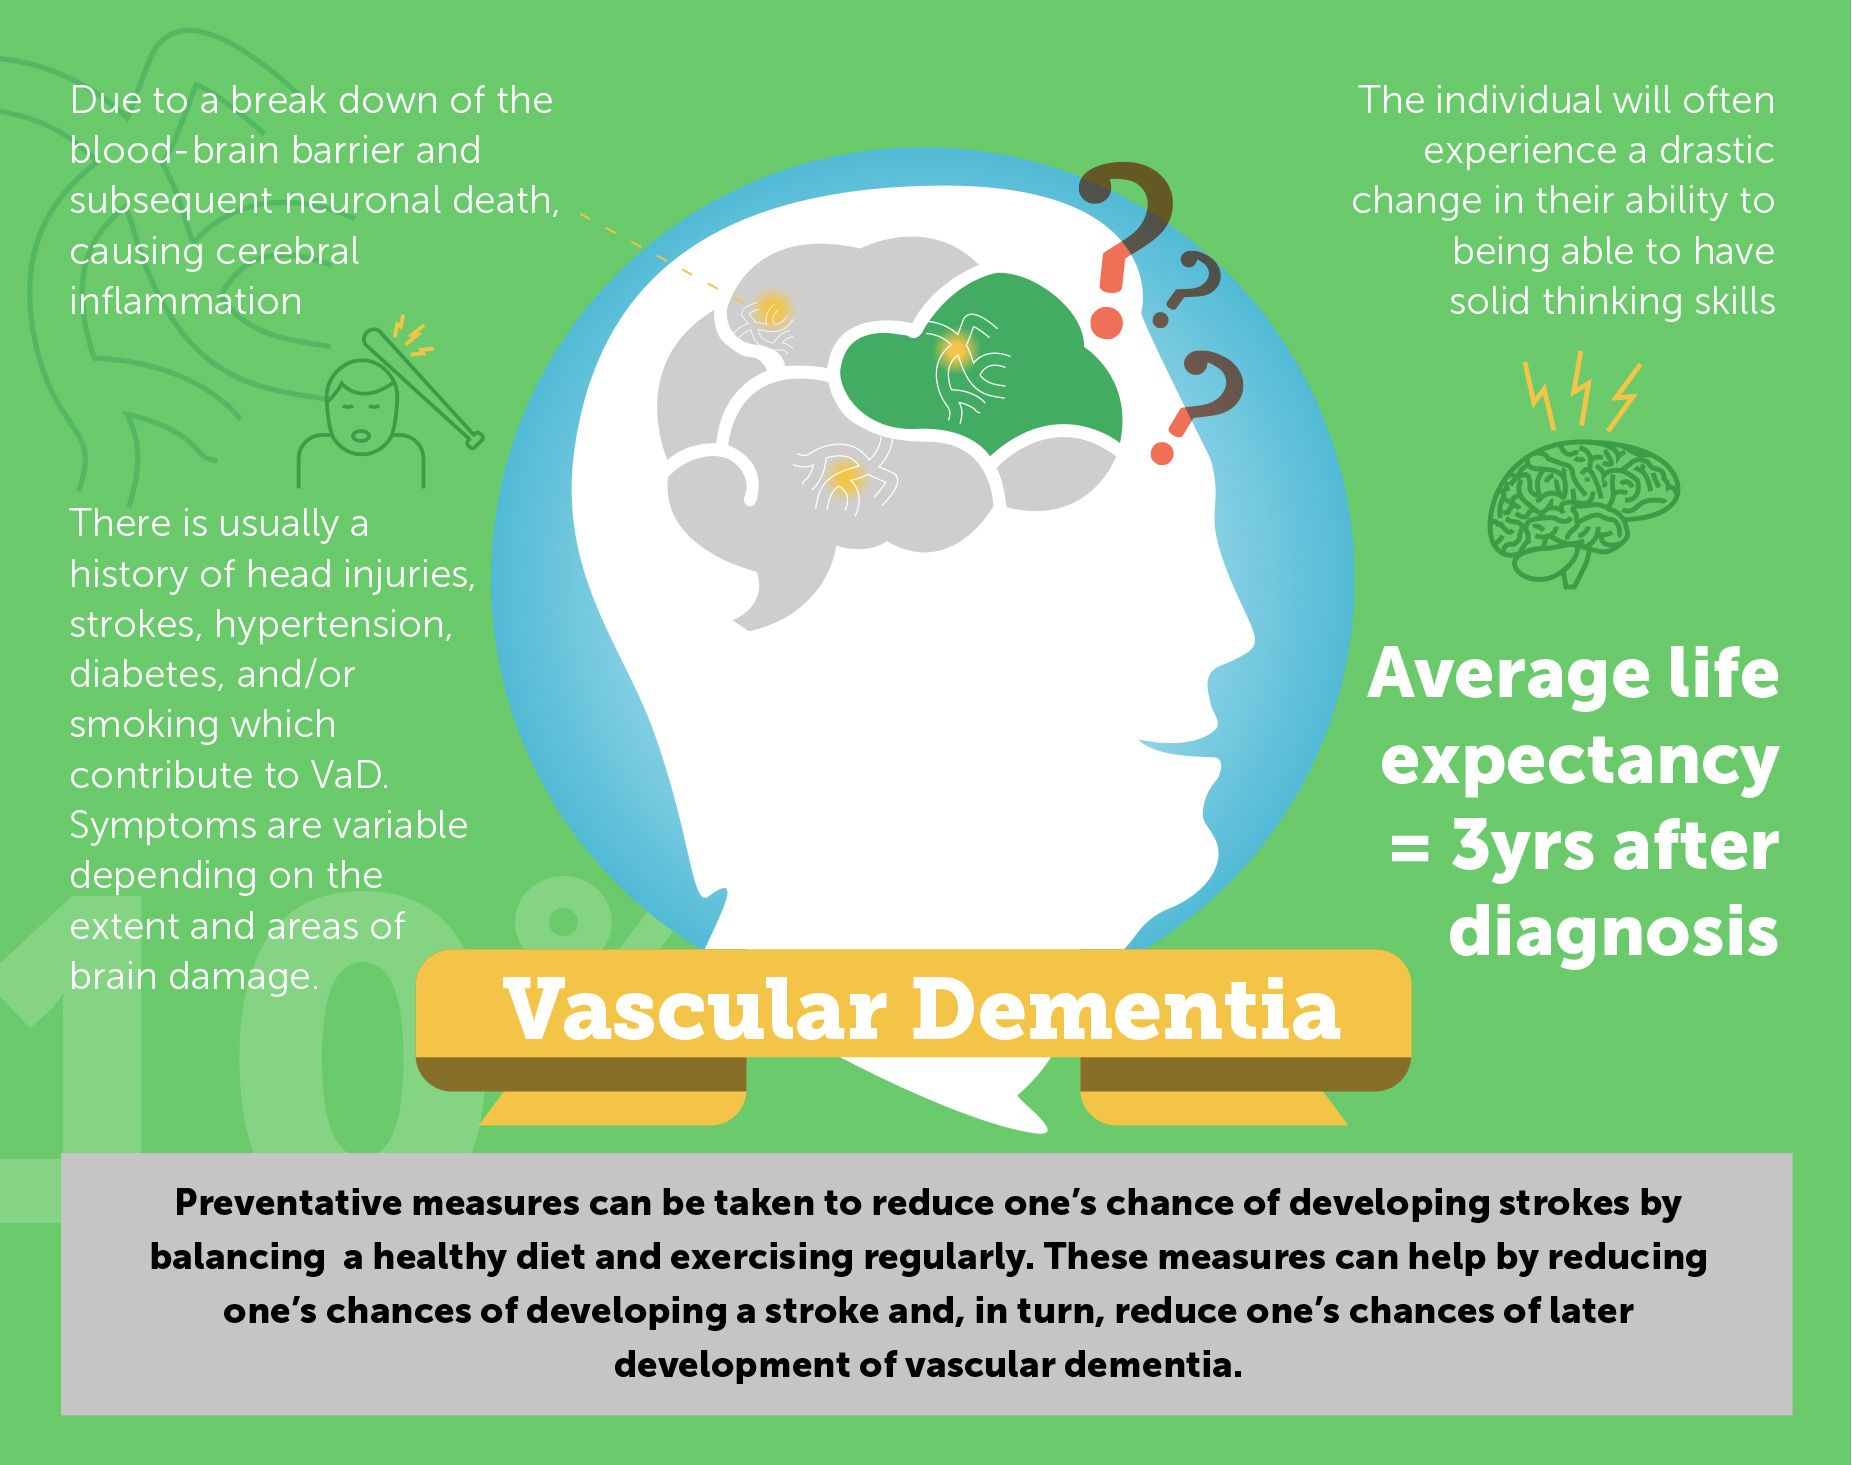 An Introduction to Different Types of Dementia